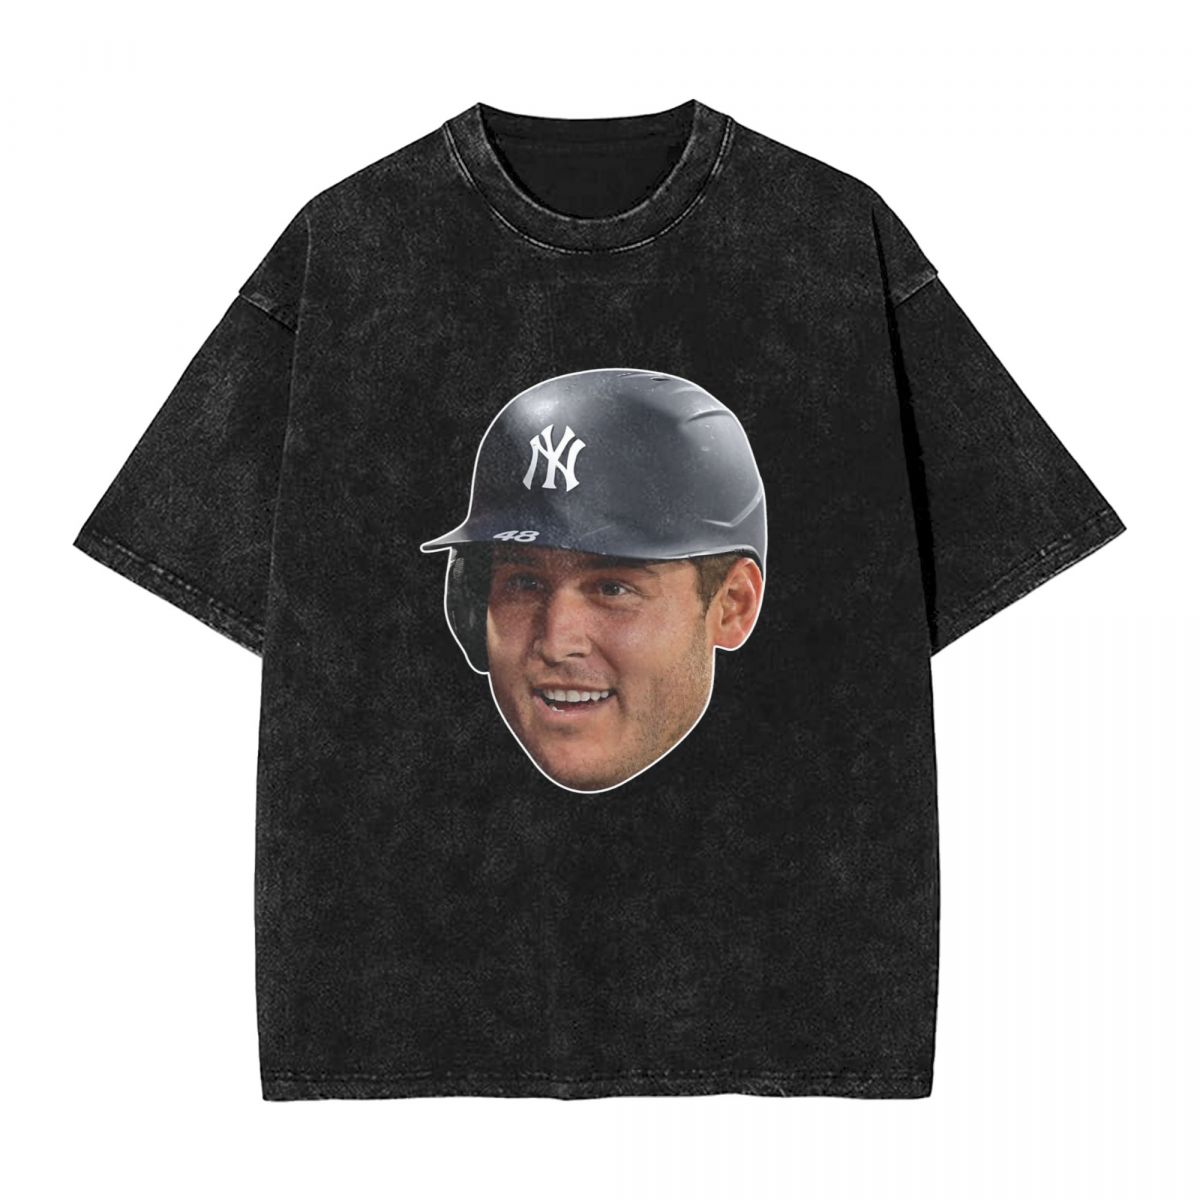 New York Yankees Anthony Rizzo Printed Vintage Men's Oversized T-Shirt